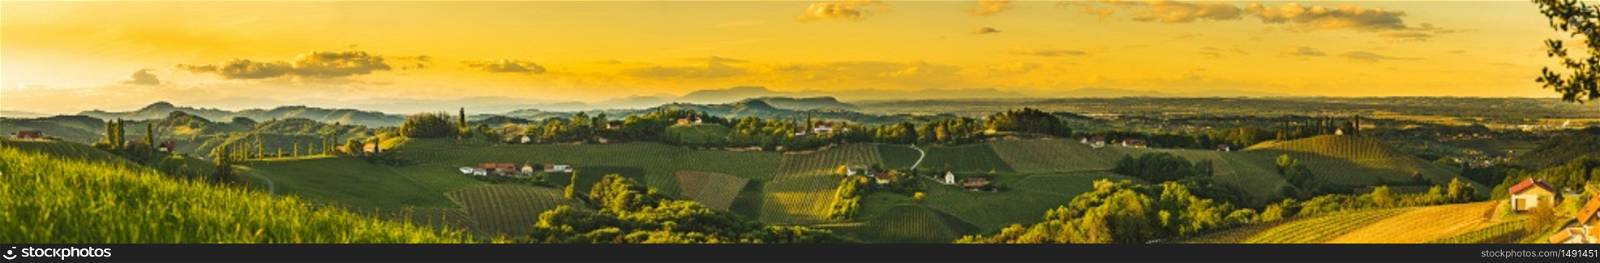 Panorama sunset over South Styria vineyard landscape in Steiermark, Austria. Beautiful tranquil destination to visit for famous white wine. Tra. Panorama sunset over South Styria vineyard landscape in Steiermark, Austria.